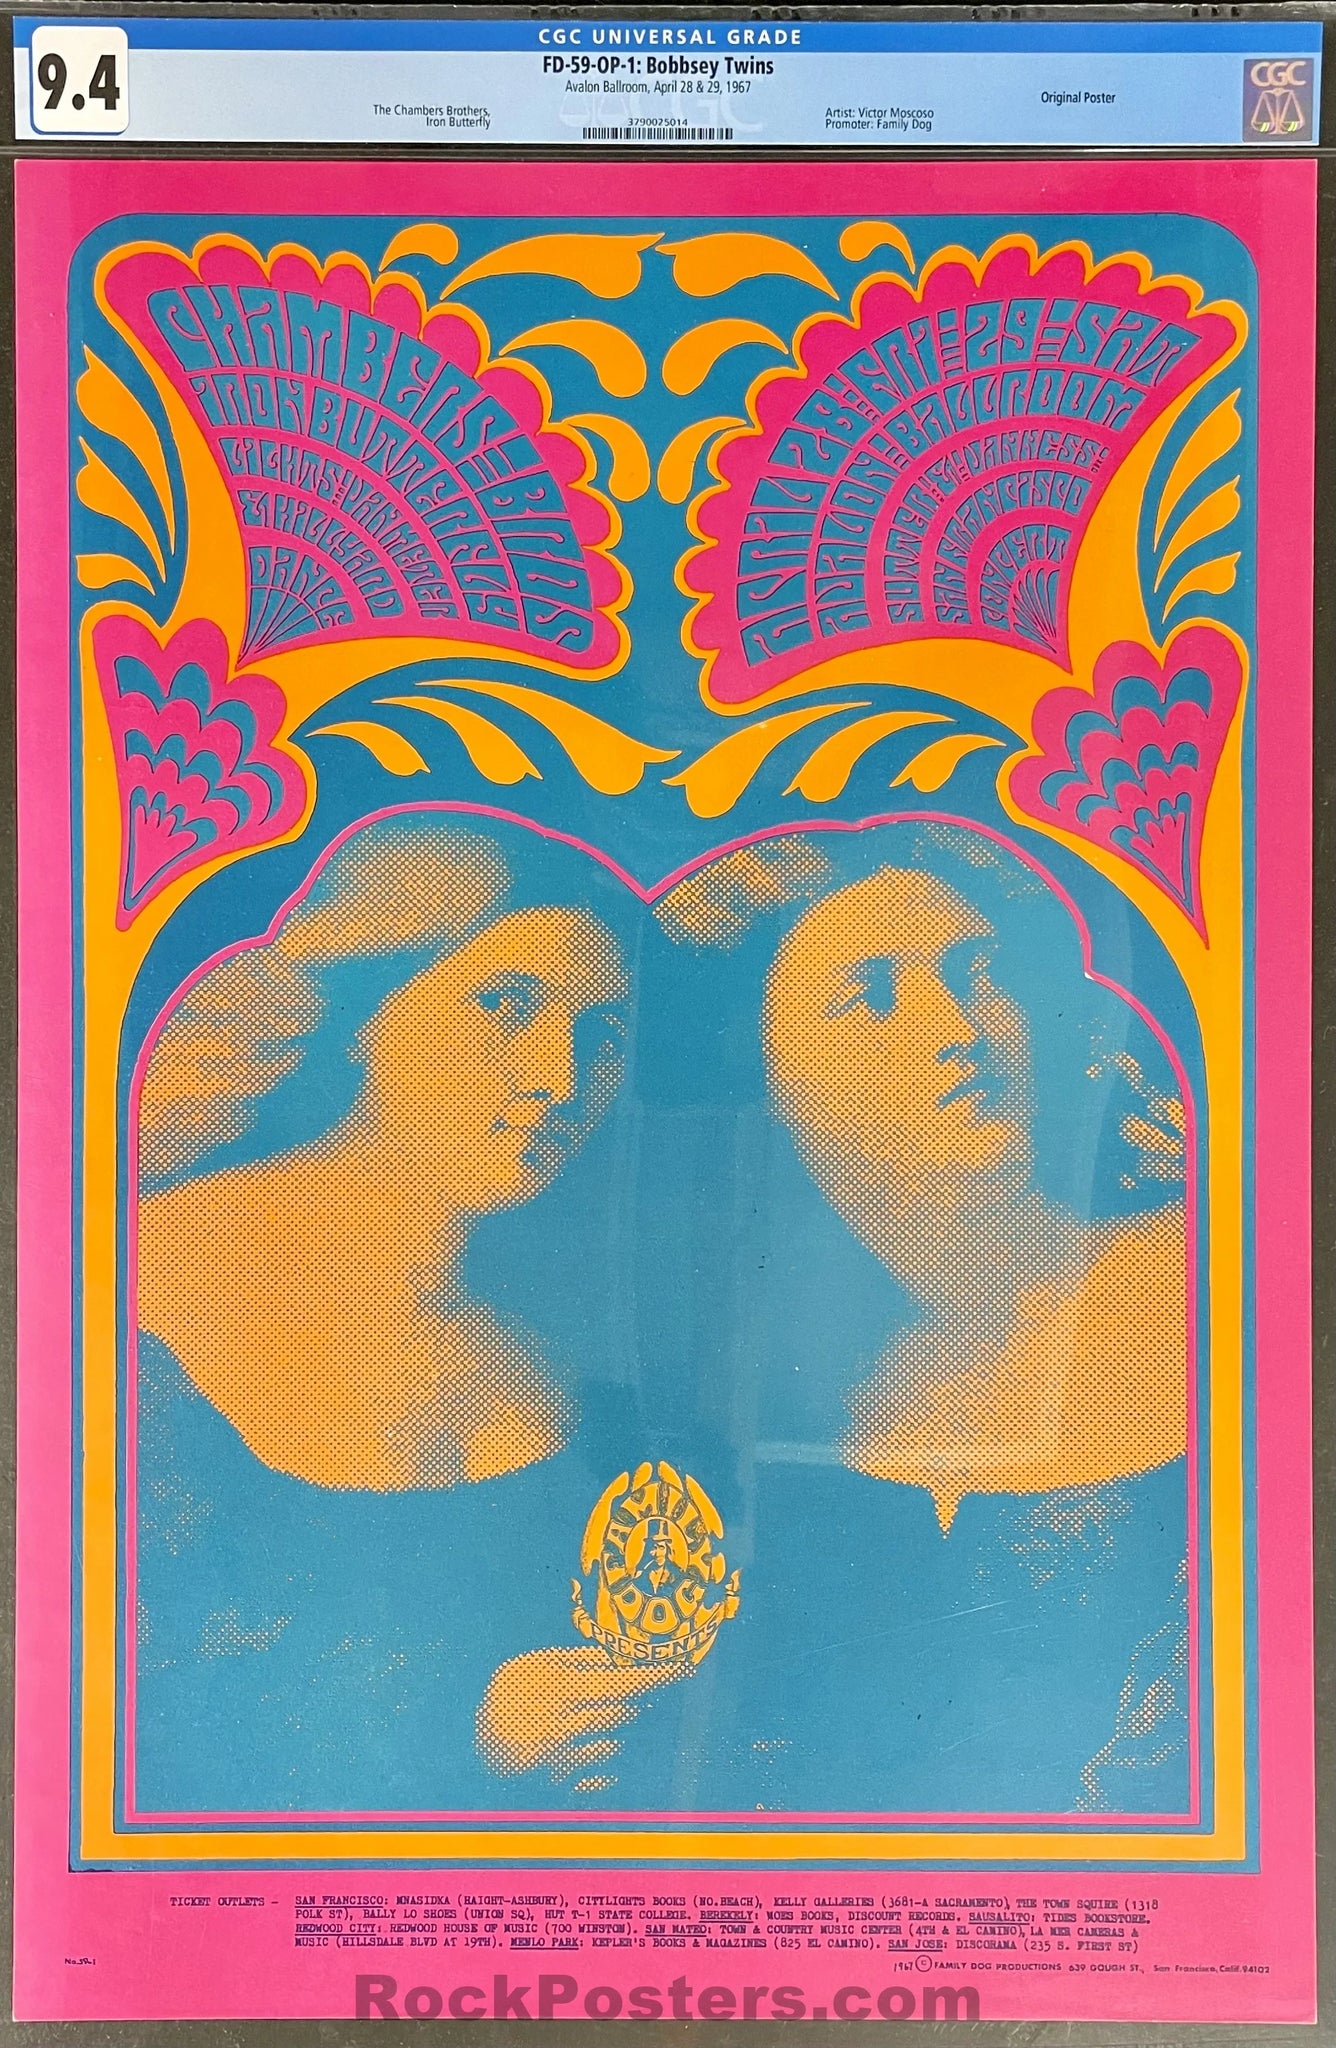 AUCTION - FD-59 - Chambers Brothers - Victor Moscoso - 1967 Poster - Avalon Ballroom - CGC Graded 9.4